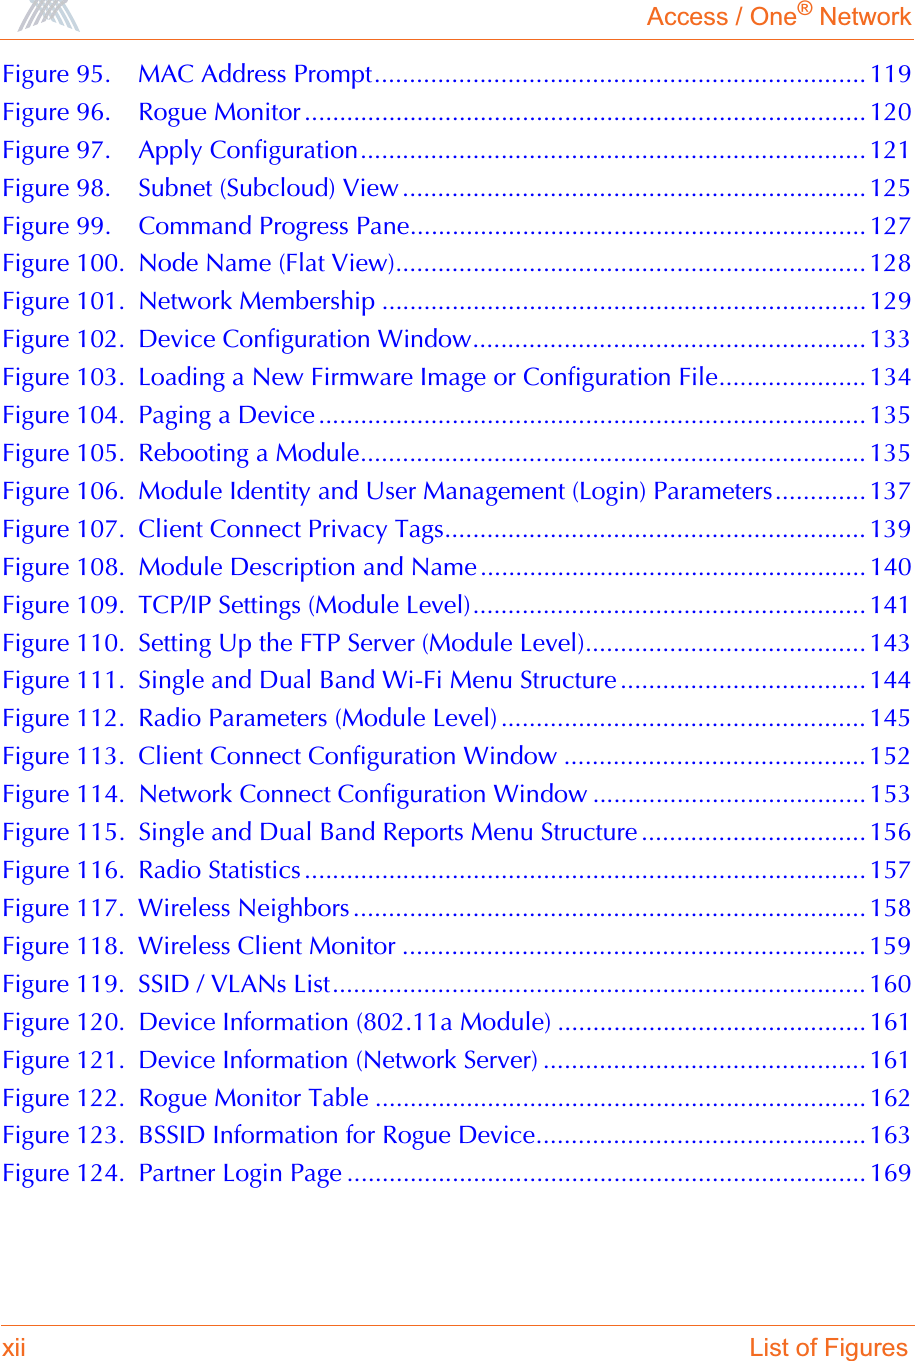 Access / One® Networkxii List of FiguresFigure 95. MAC Address Prompt...................................................................... 119Figure 96. Rogue Monitor ................................................................................ 120Figure 97. Apply Configuration........................................................................ 121Figure 98. Subnet (Subcloud) View ..................................................................125Figure 99. Command Progress Pane................................................................. 127Figure 100. Node Name (Flat View)................................................................... 128Figure 101. Network Membership ..................................................................... 129Figure 102. Device Configuration Window........................................................ 133Figure 103. Loading a New Firmware Image or Configuration File..................... 134Figure 104. Paging a Device .............................................................................. 135Figure 105. Rebooting a Module........................................................................ 135Figure 106. Module Identity and User Management (Login) Parameters............. 137Figure 107. Client Connect Privacy Tags............................................................ 139Figure 108. Module Description and Name ....................................................... 140Figure 109. TCP/IP Settings (Module Level)........................................................ 141Figure 110. Setting Up the FTP Server (Module Level)........................................ 143Figure 111. Single and Dual Band Wi-Fi Menu Structure ................................... 144Figure 112. Radio Parameters (Module Level) .................................................... 145Figure 113. Client Connect Configuration Window ........................................... 152Figure 114. Network Connect Configuration Window ....................................... 153Figure 115. Single and Dual Band Reports Menu Structure ................................ 156Figure 116. Radio Statistics................................................................................ 157Figure 117. Wireless Neighbors ......................................................................... 158Figure 118. Wireless Client Monitor .................................................................. 159Figure 119. SSID / VLANs List............................................................................ 160Figure 120. Device Information (802.11a Module) ............................................ 161Figure 121. Device Information (Network Server) .............................................. 161Figure 122. Rogue Monitor Table ...................................................................... 162Figure 123. BSSID Information for Rogue Device............................................... 163Figure 124. Partner Login Page .......................................................................... 169